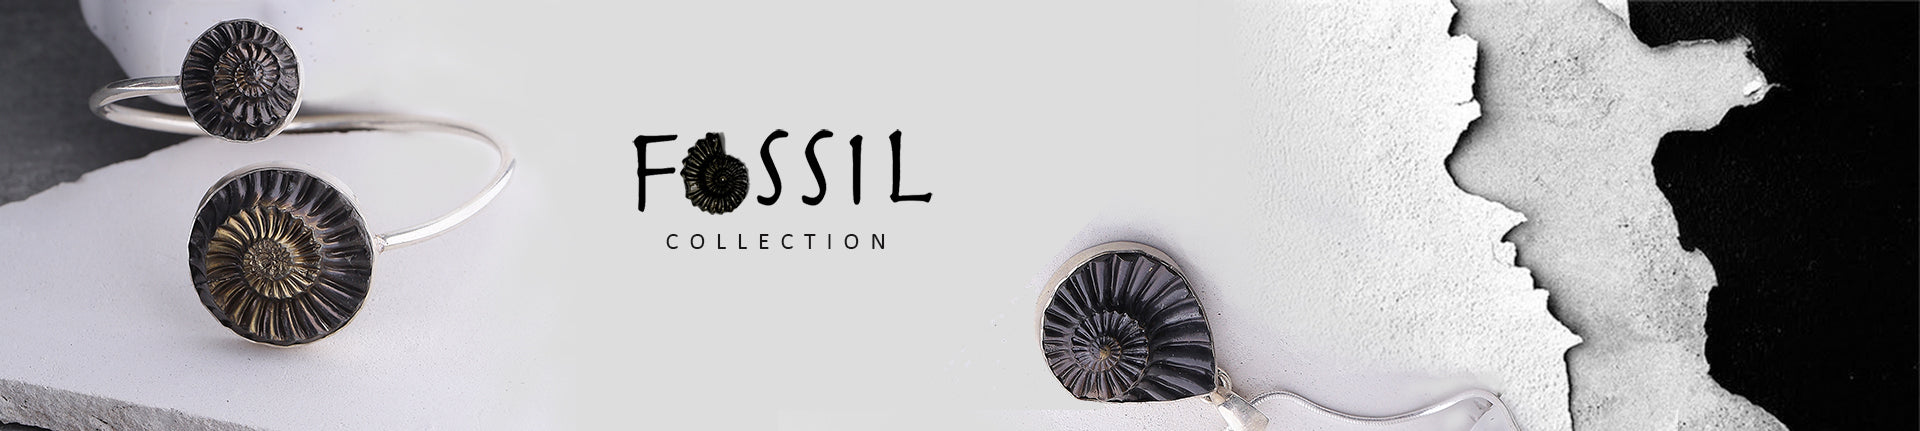 Banner for Fossil Collection based on Ammonites